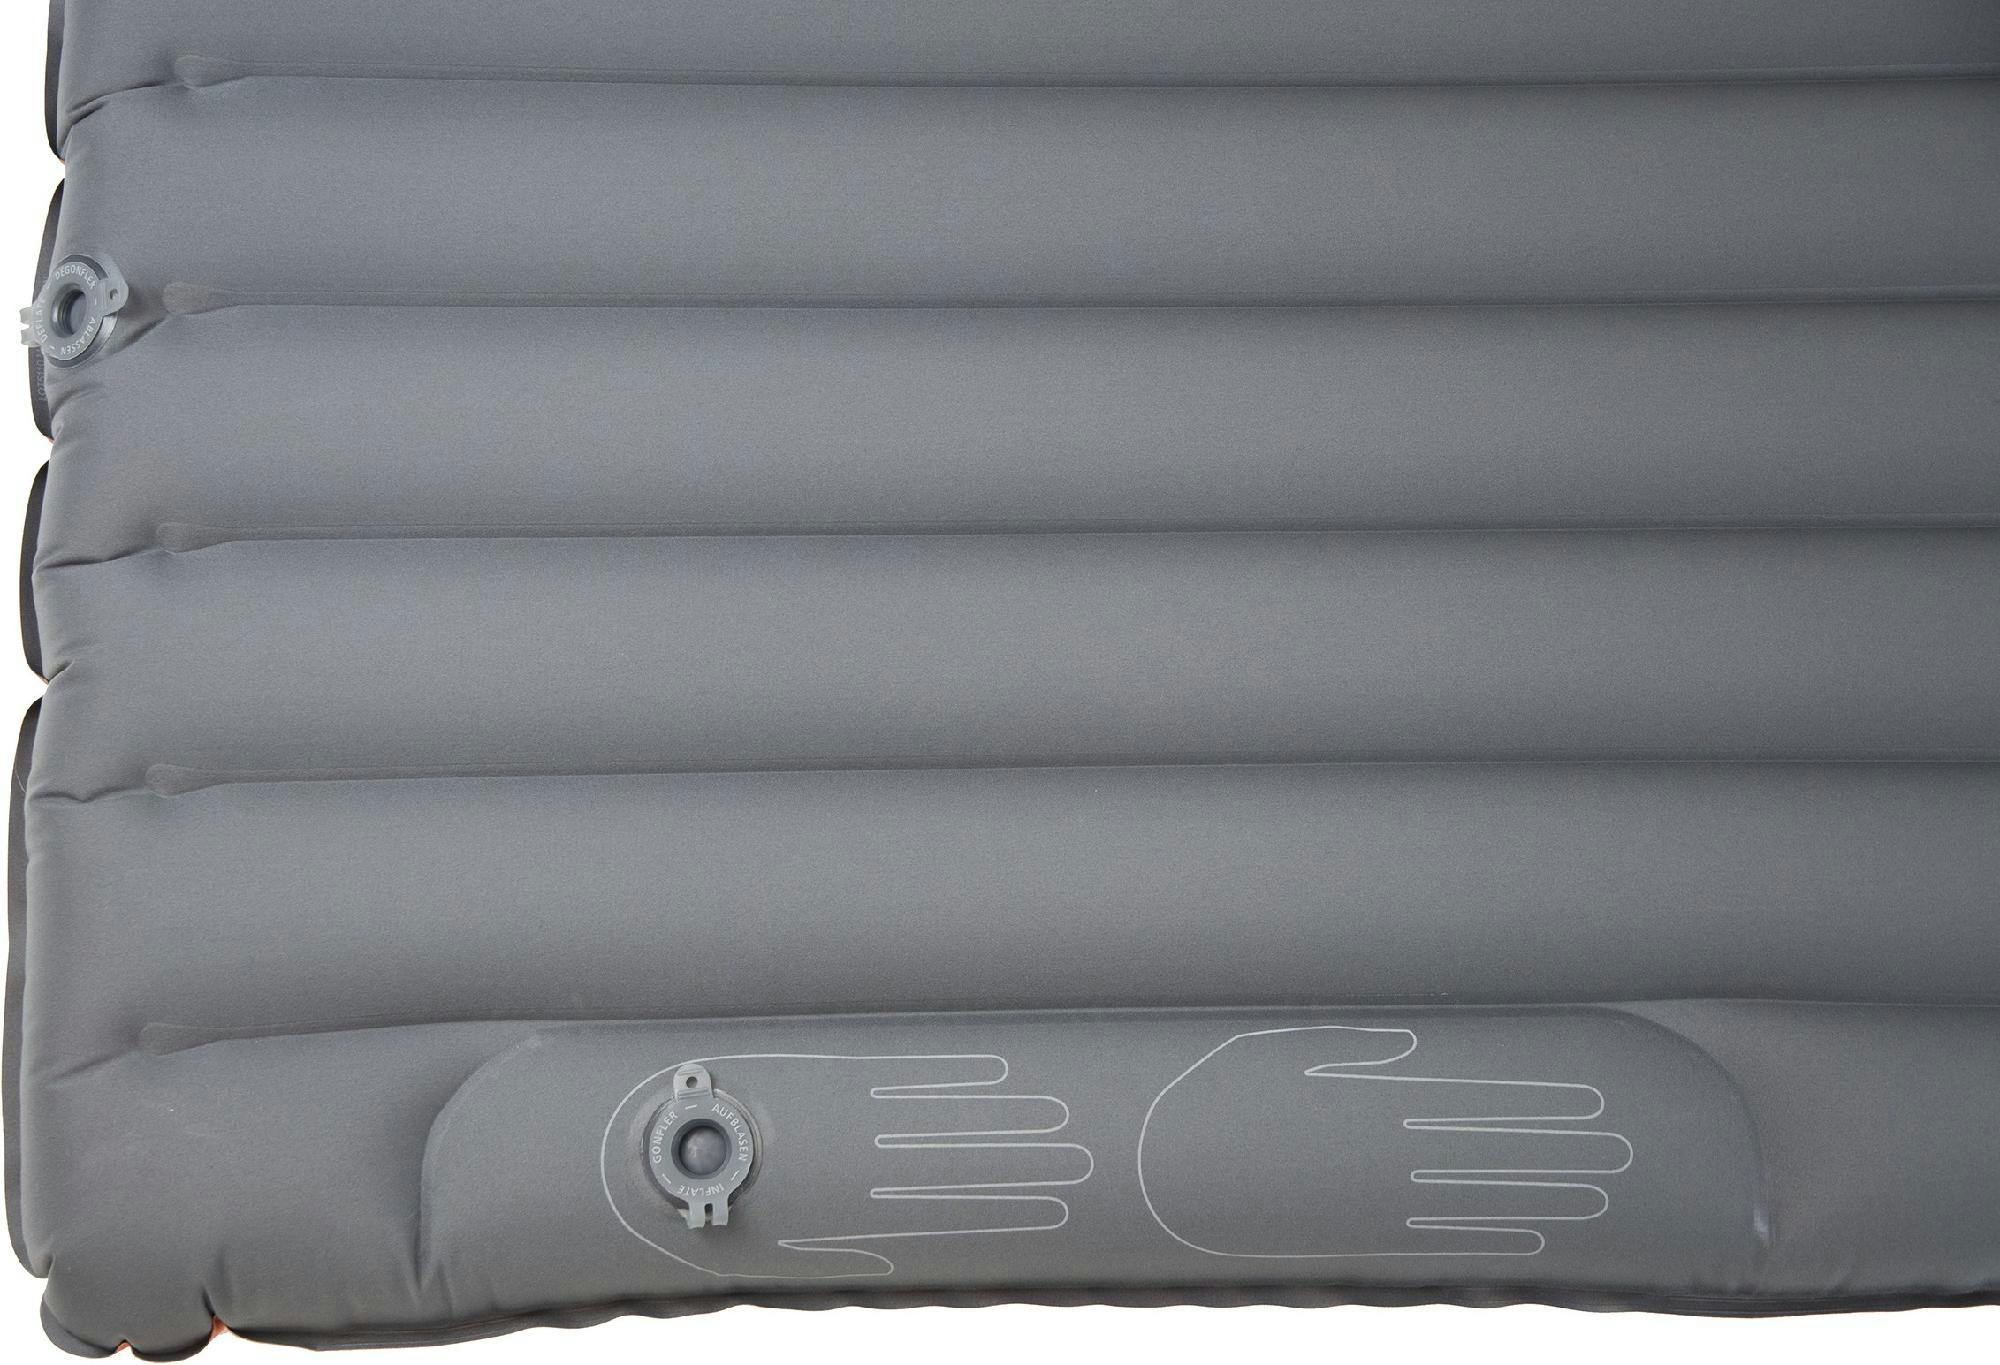 Exped SynMat XP 7 Sleeping Pad · Terracotta/Charcoal